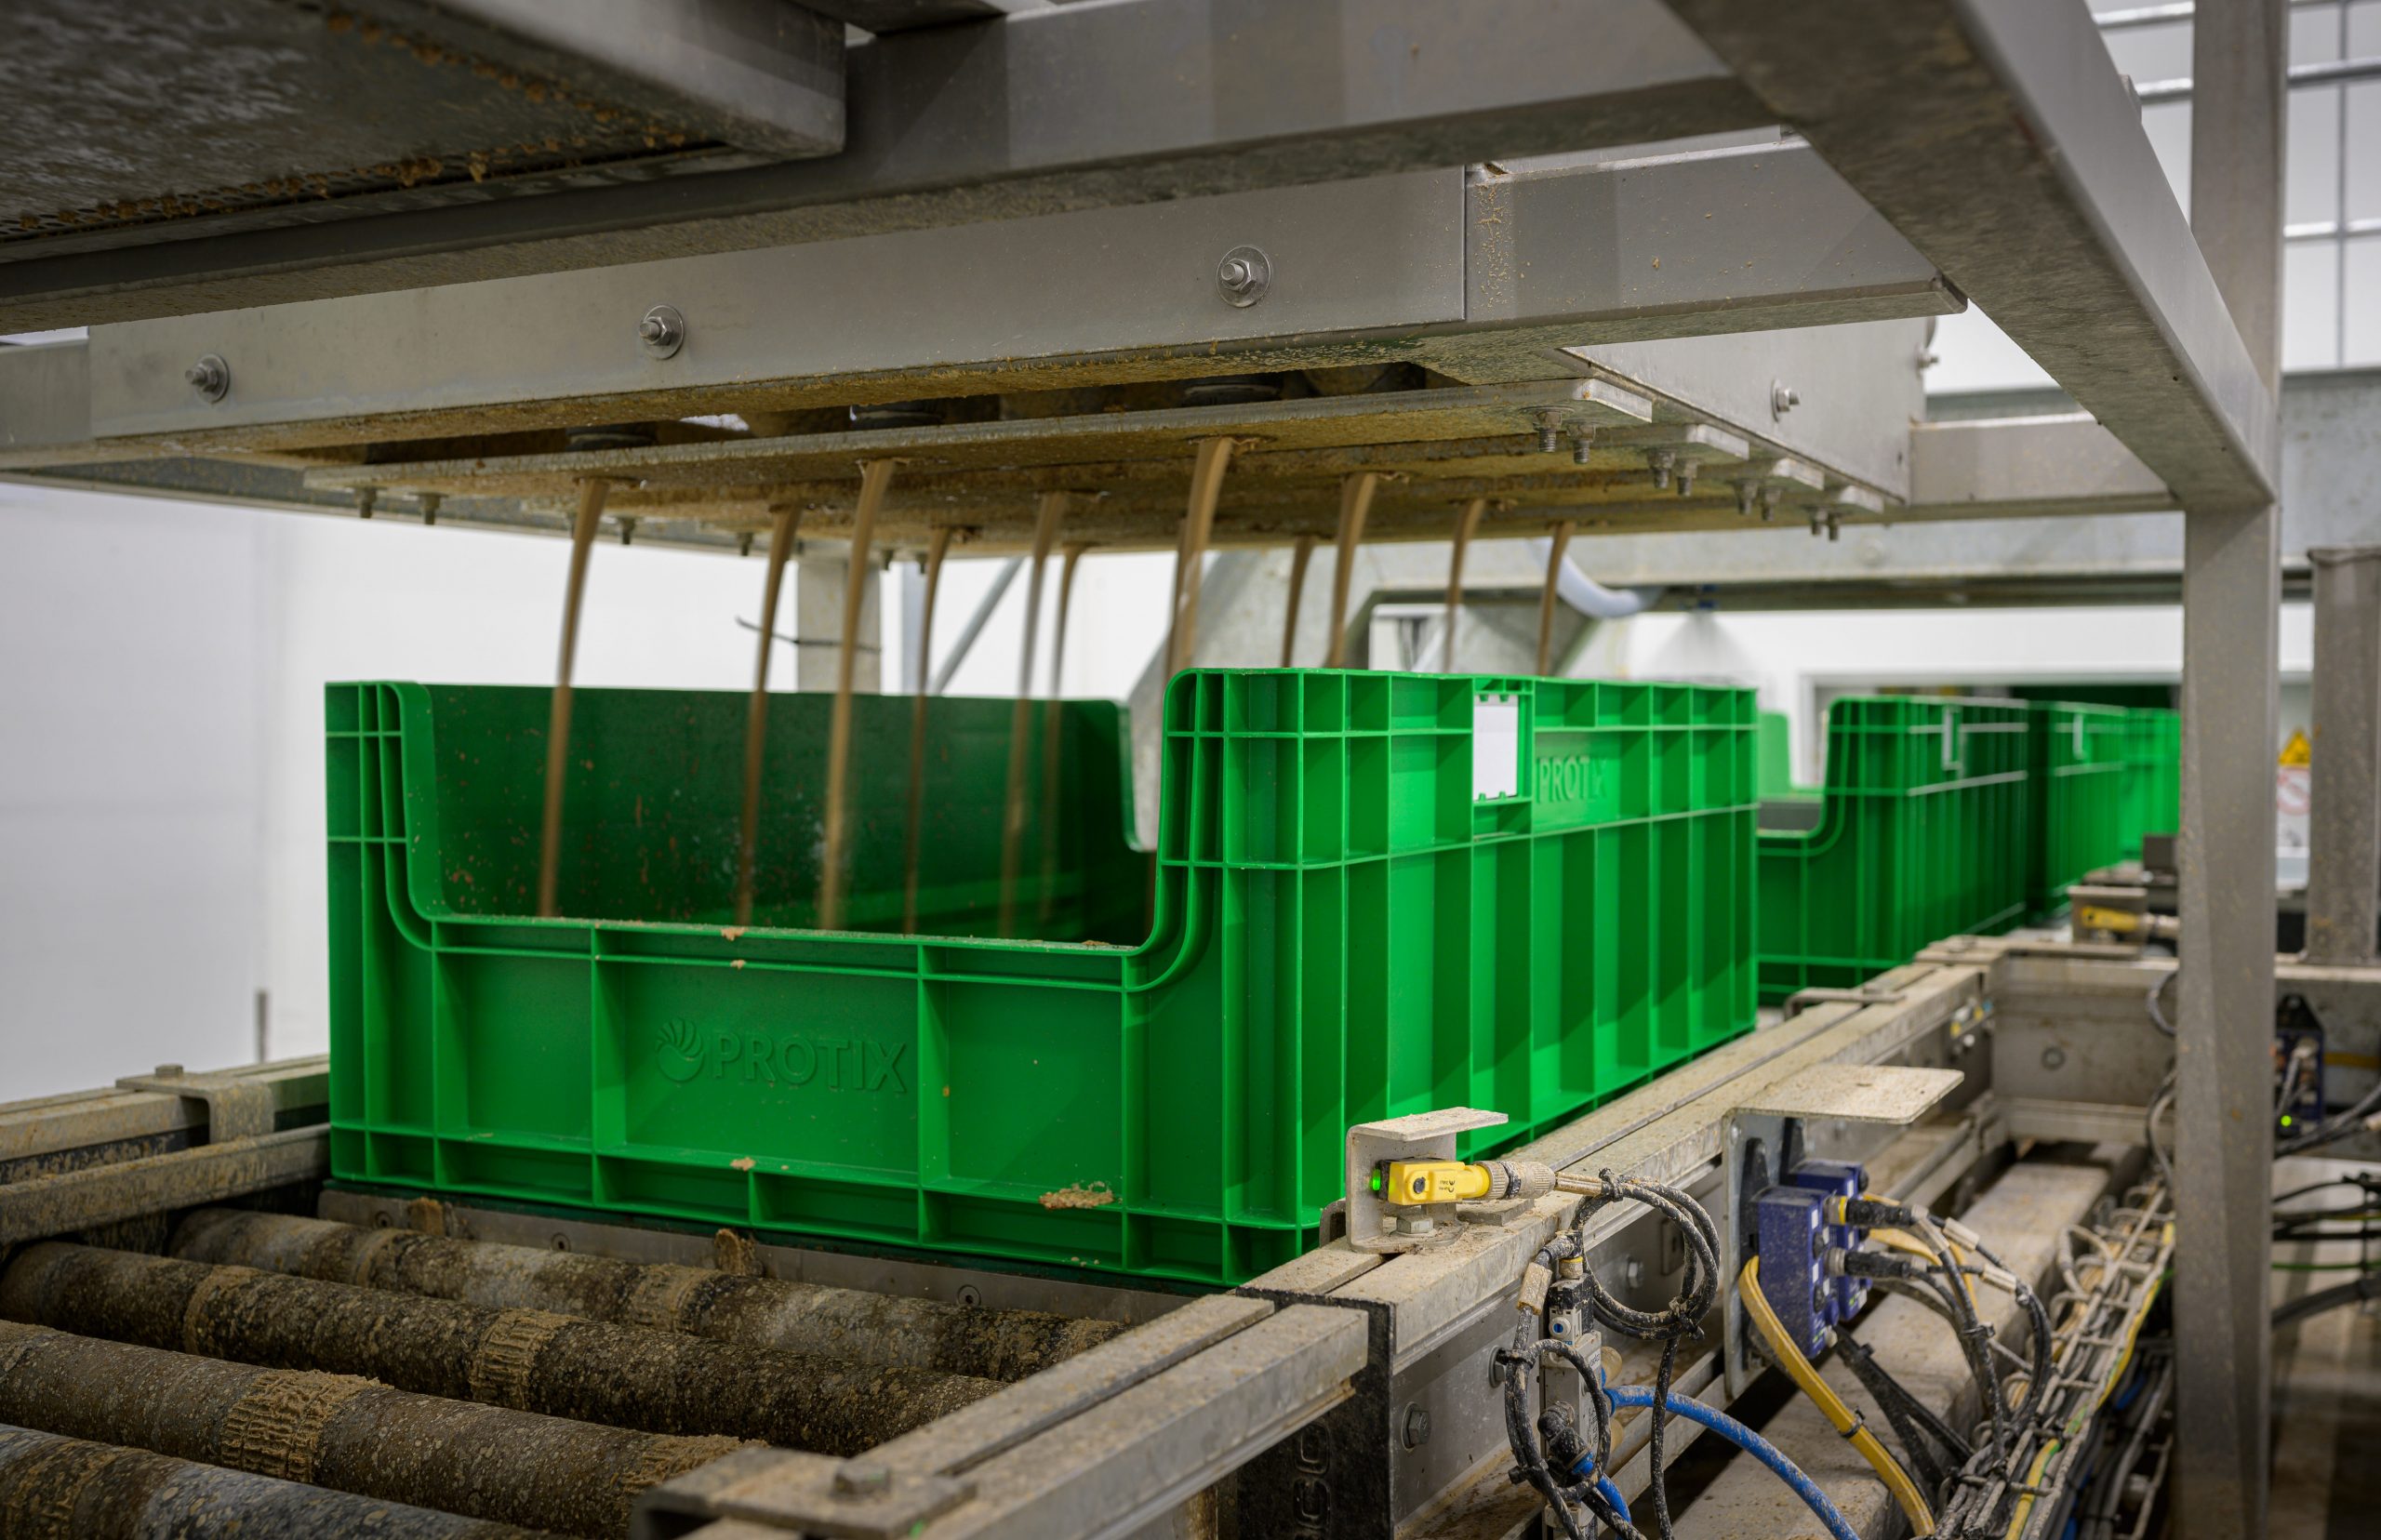 Large green crates with wires attached on a conveyor belt